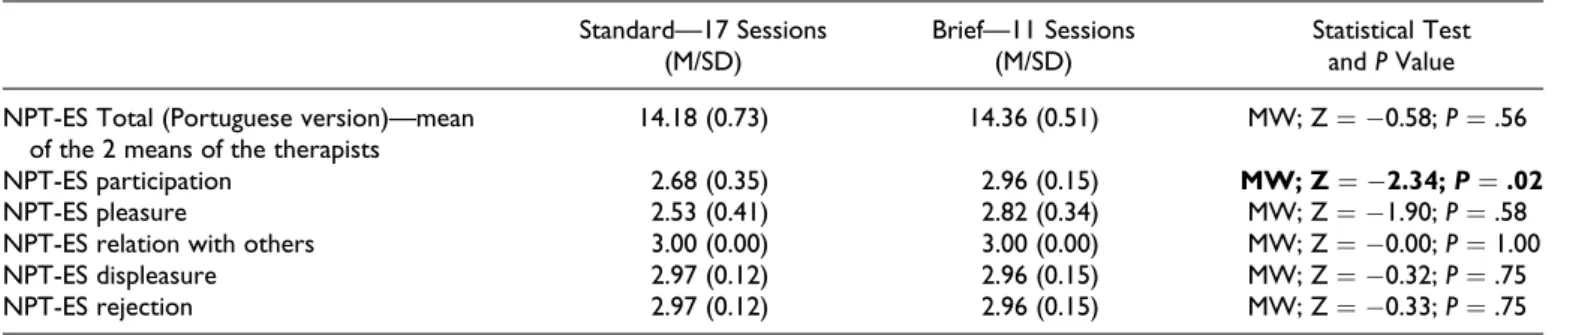 Table 7. Therapy Experience—Standard and Brief Intervention Scores.